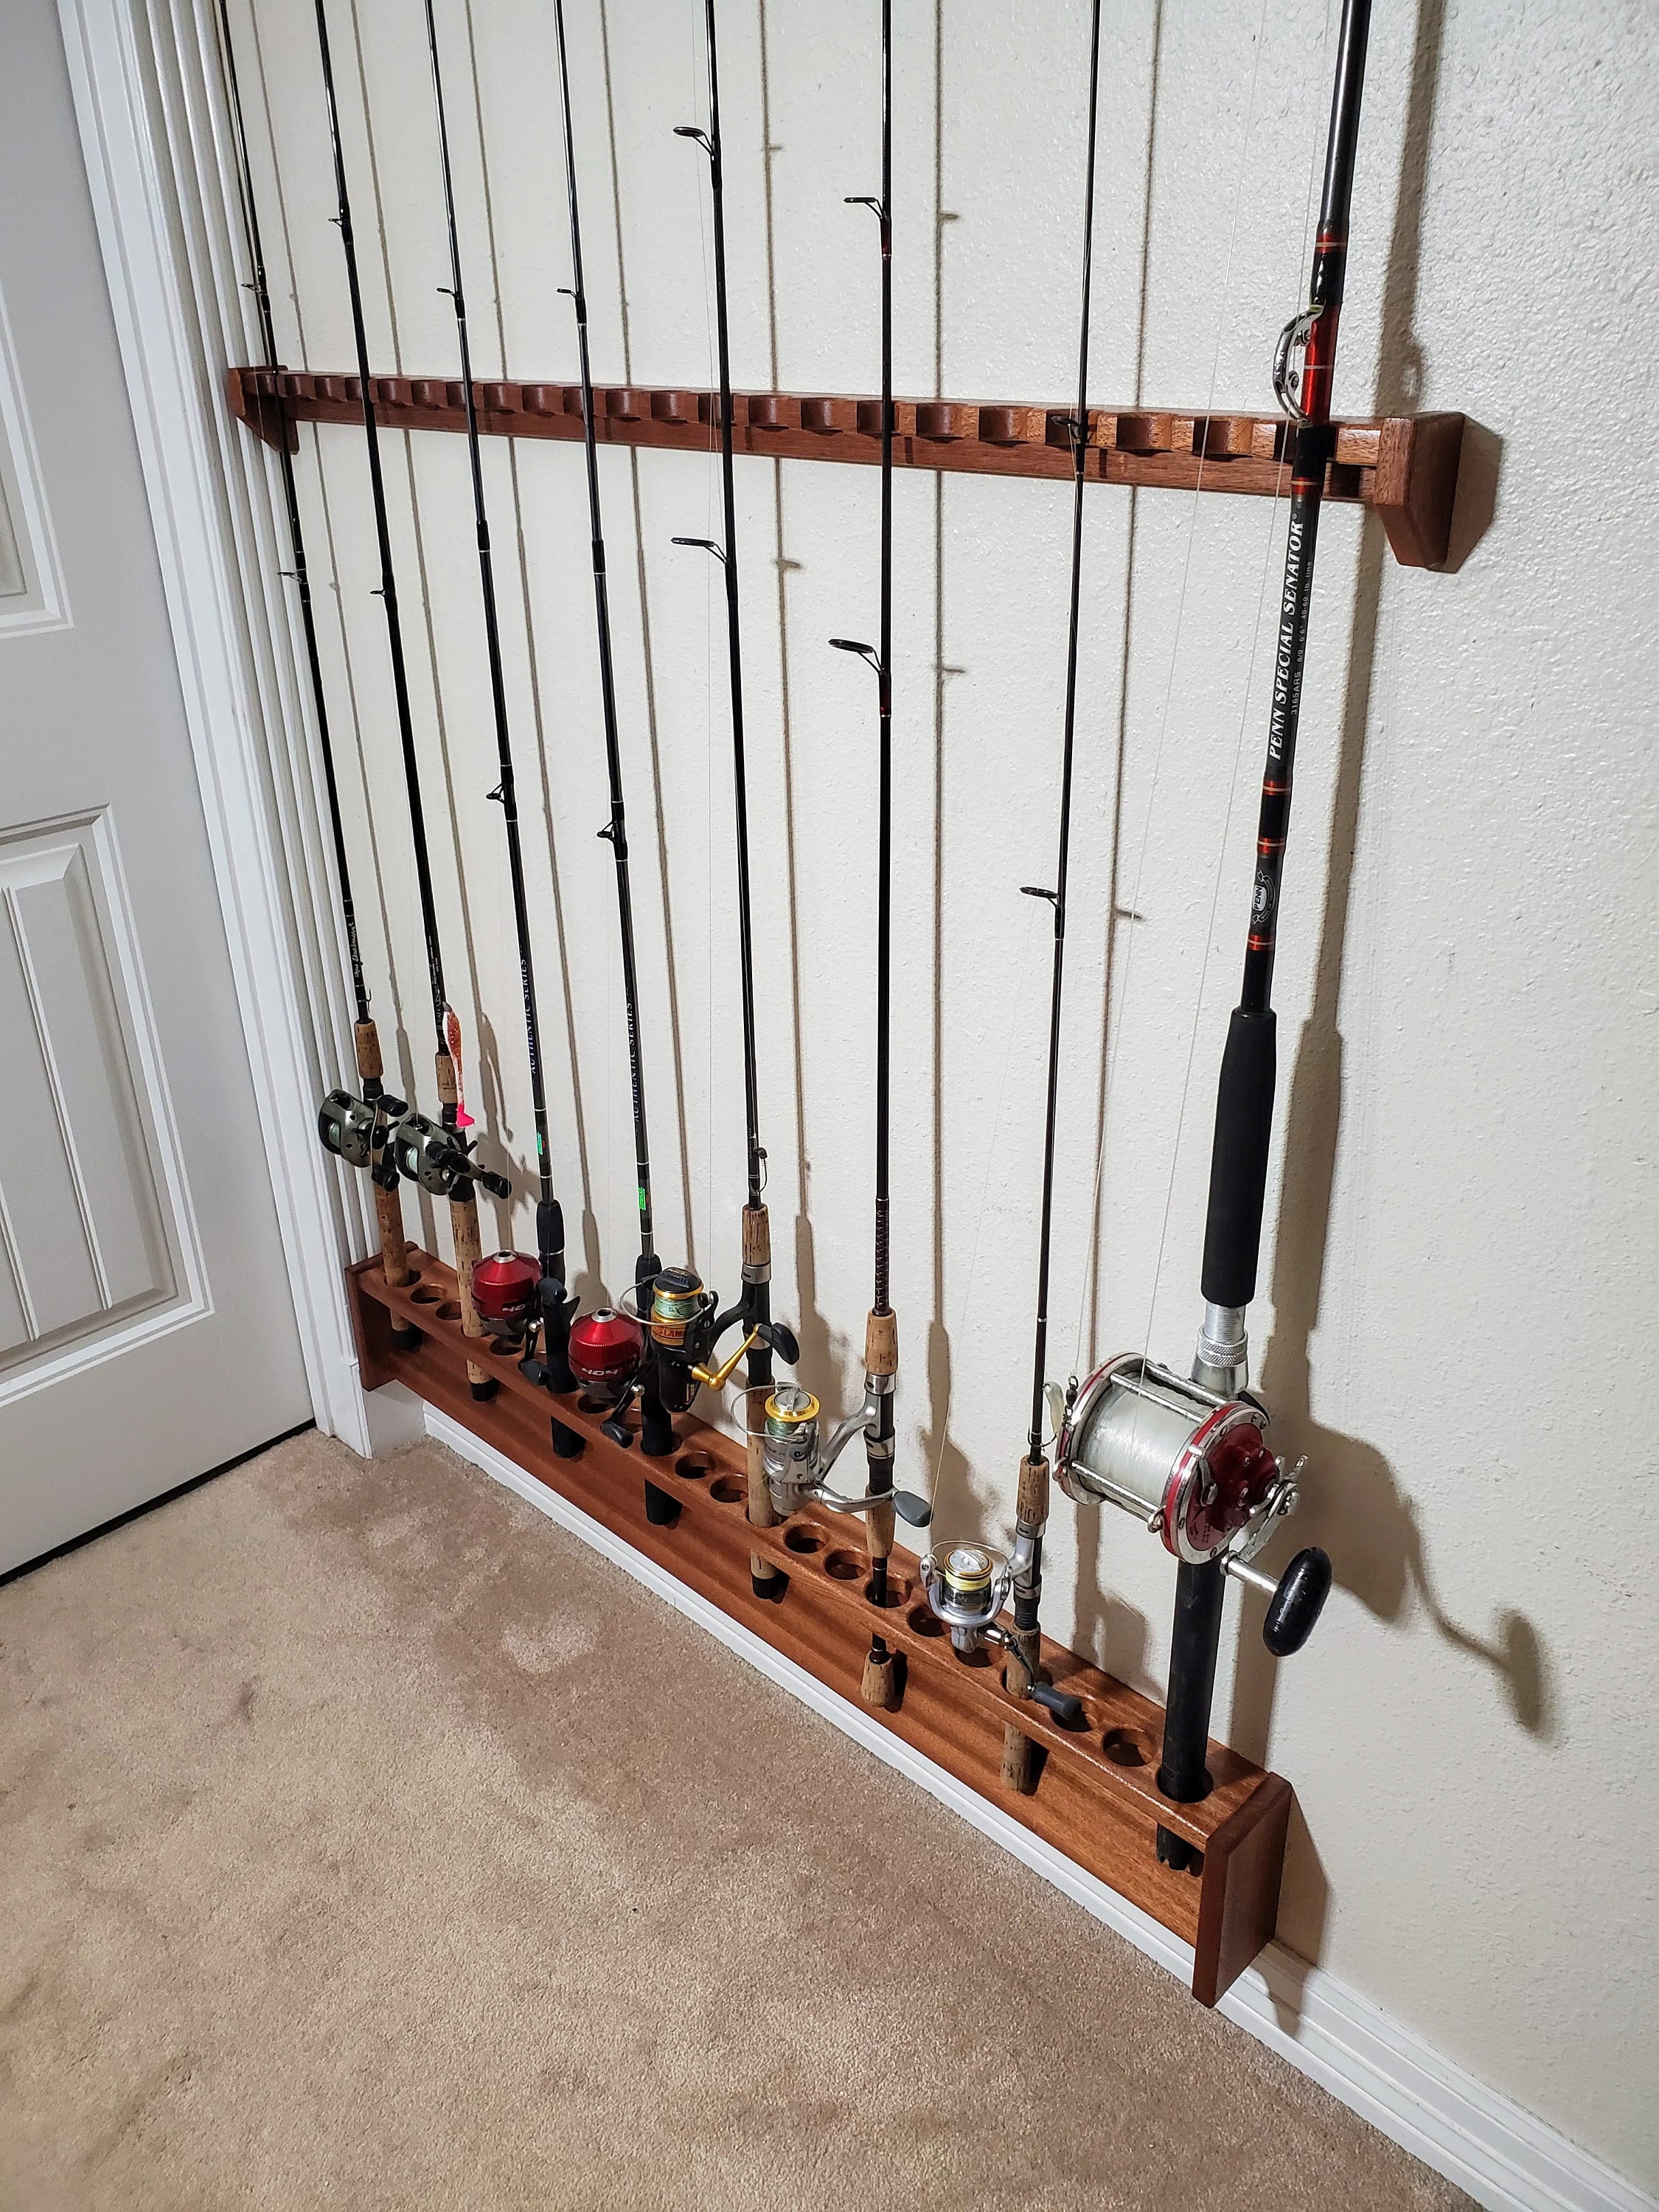 Solid Mahogany Rod Rack, 46 Inch Wall Mounted Built in Fishing Pole Holder,  Real Estate Closing Gift for Fisherman Outdoorsman Hunting Cabin -   Canada